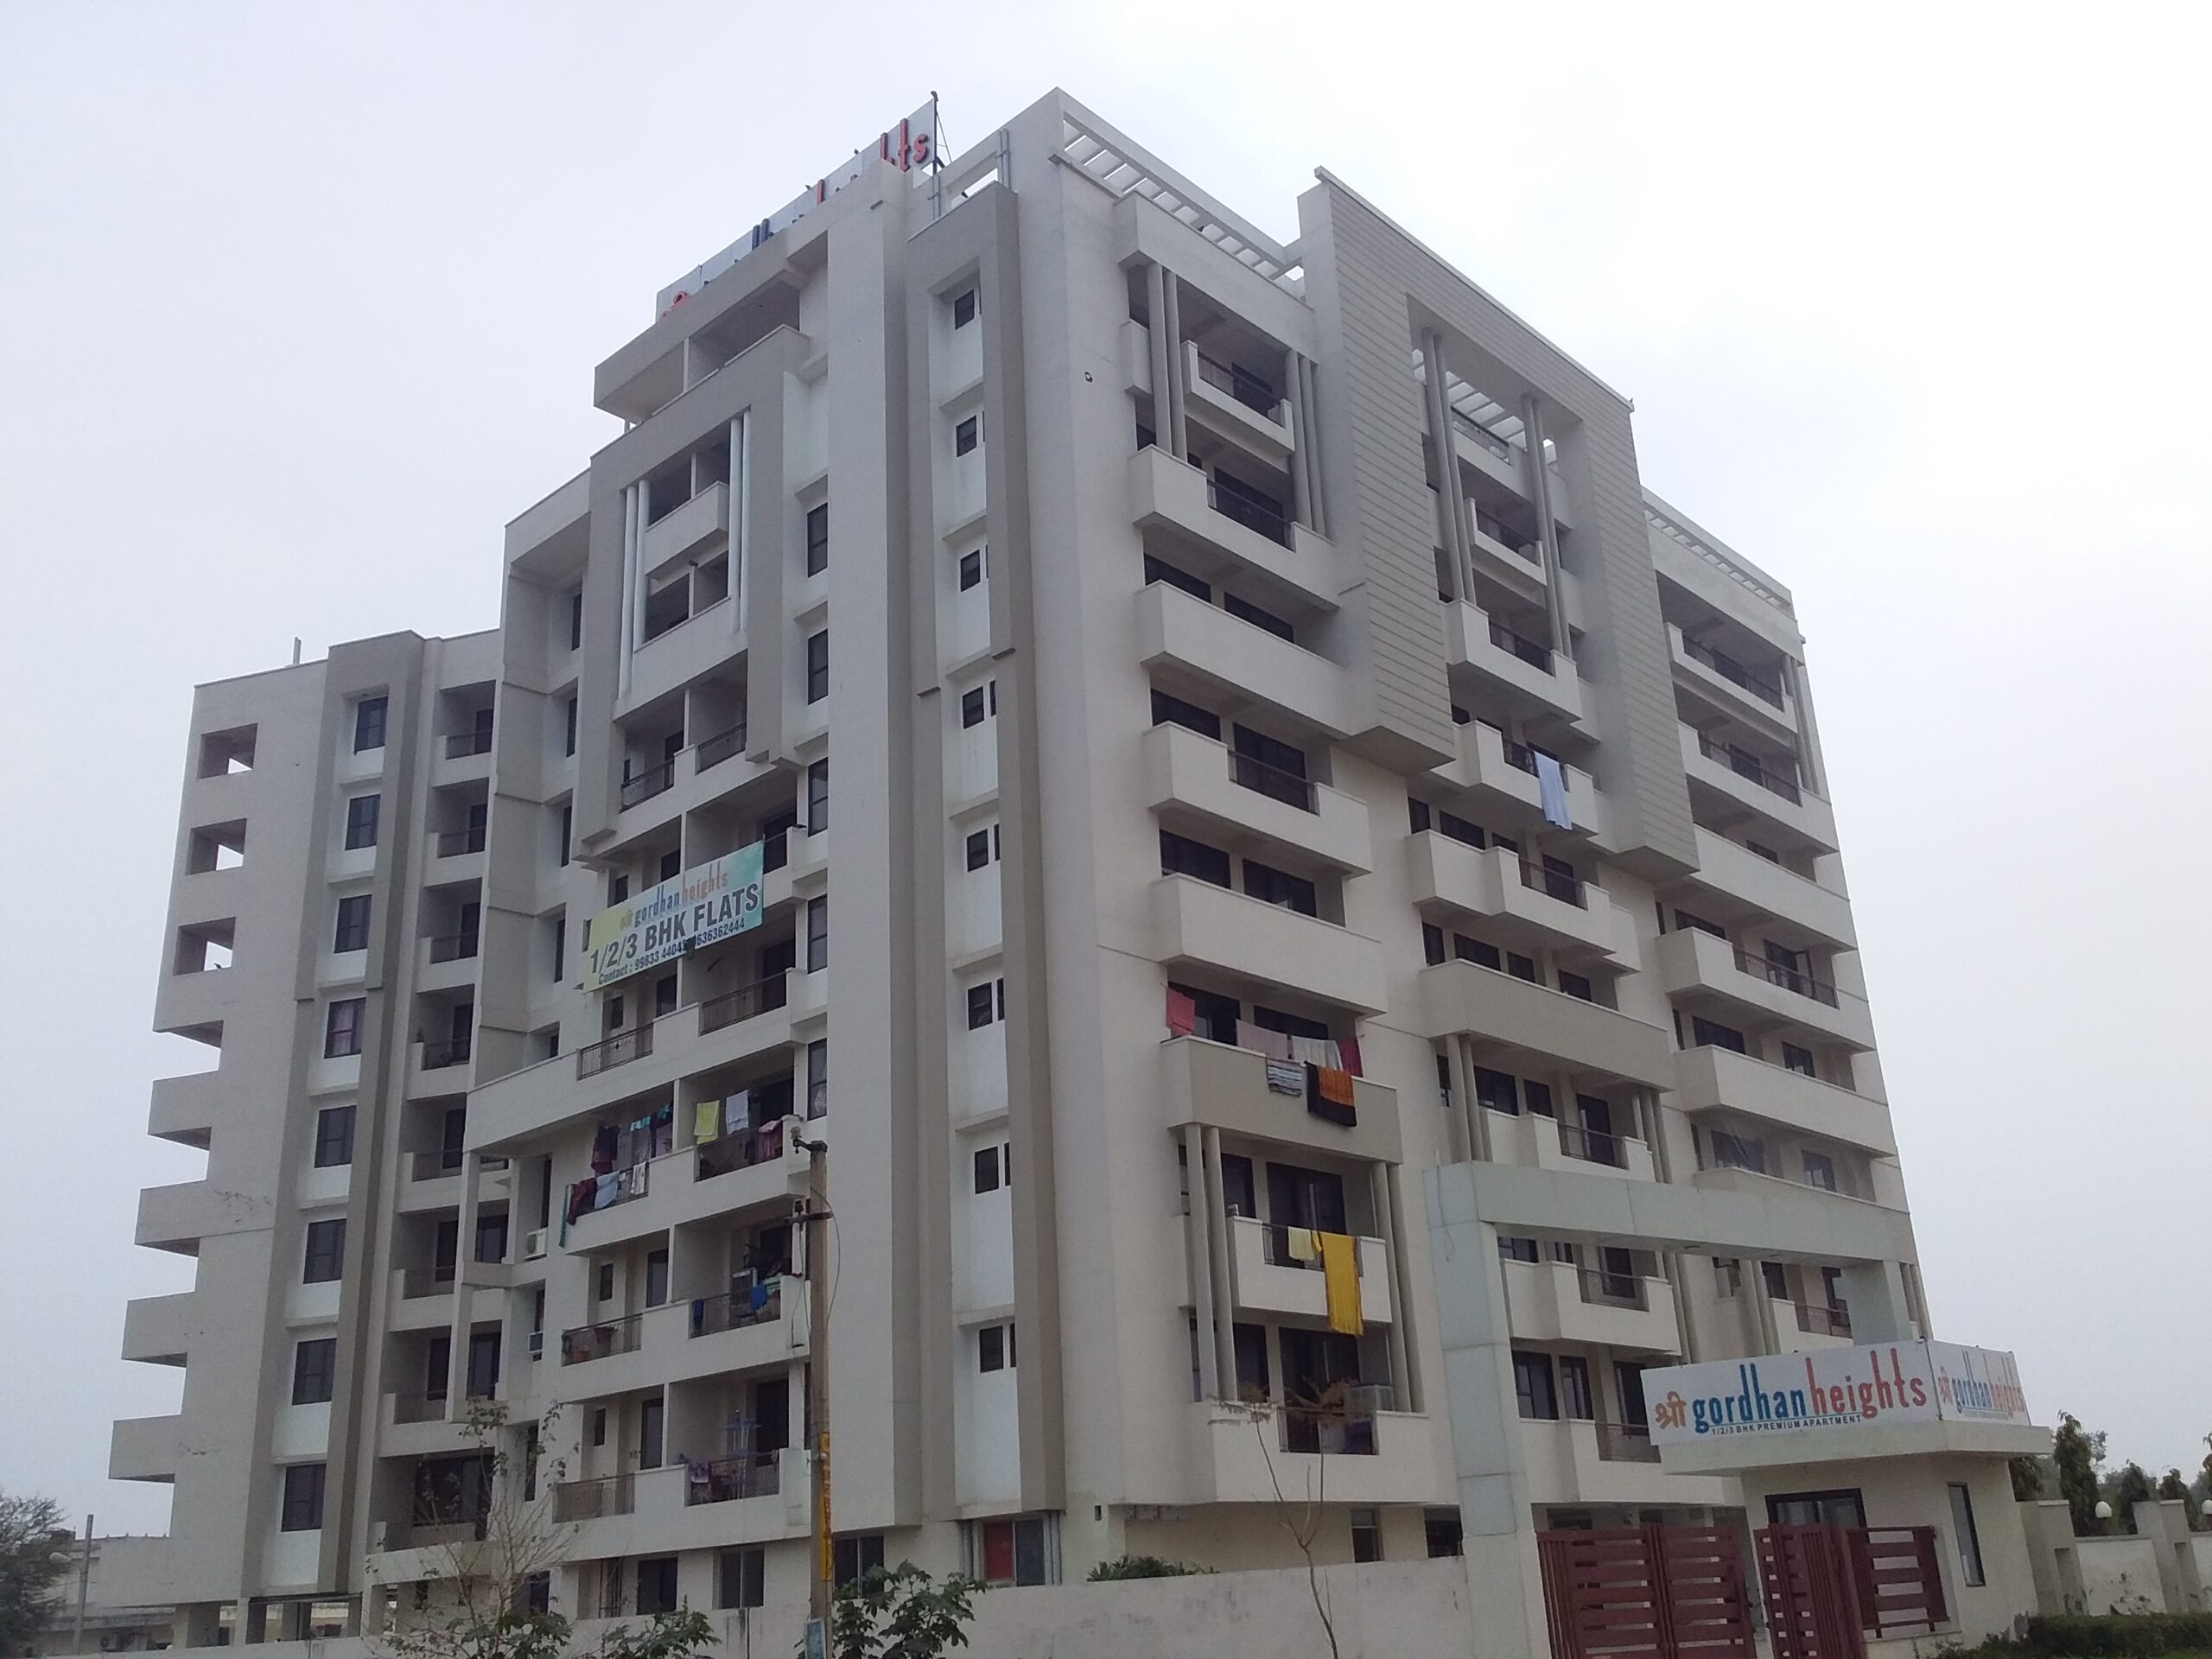 Shri gordhan heights : Housing project by front desk architects